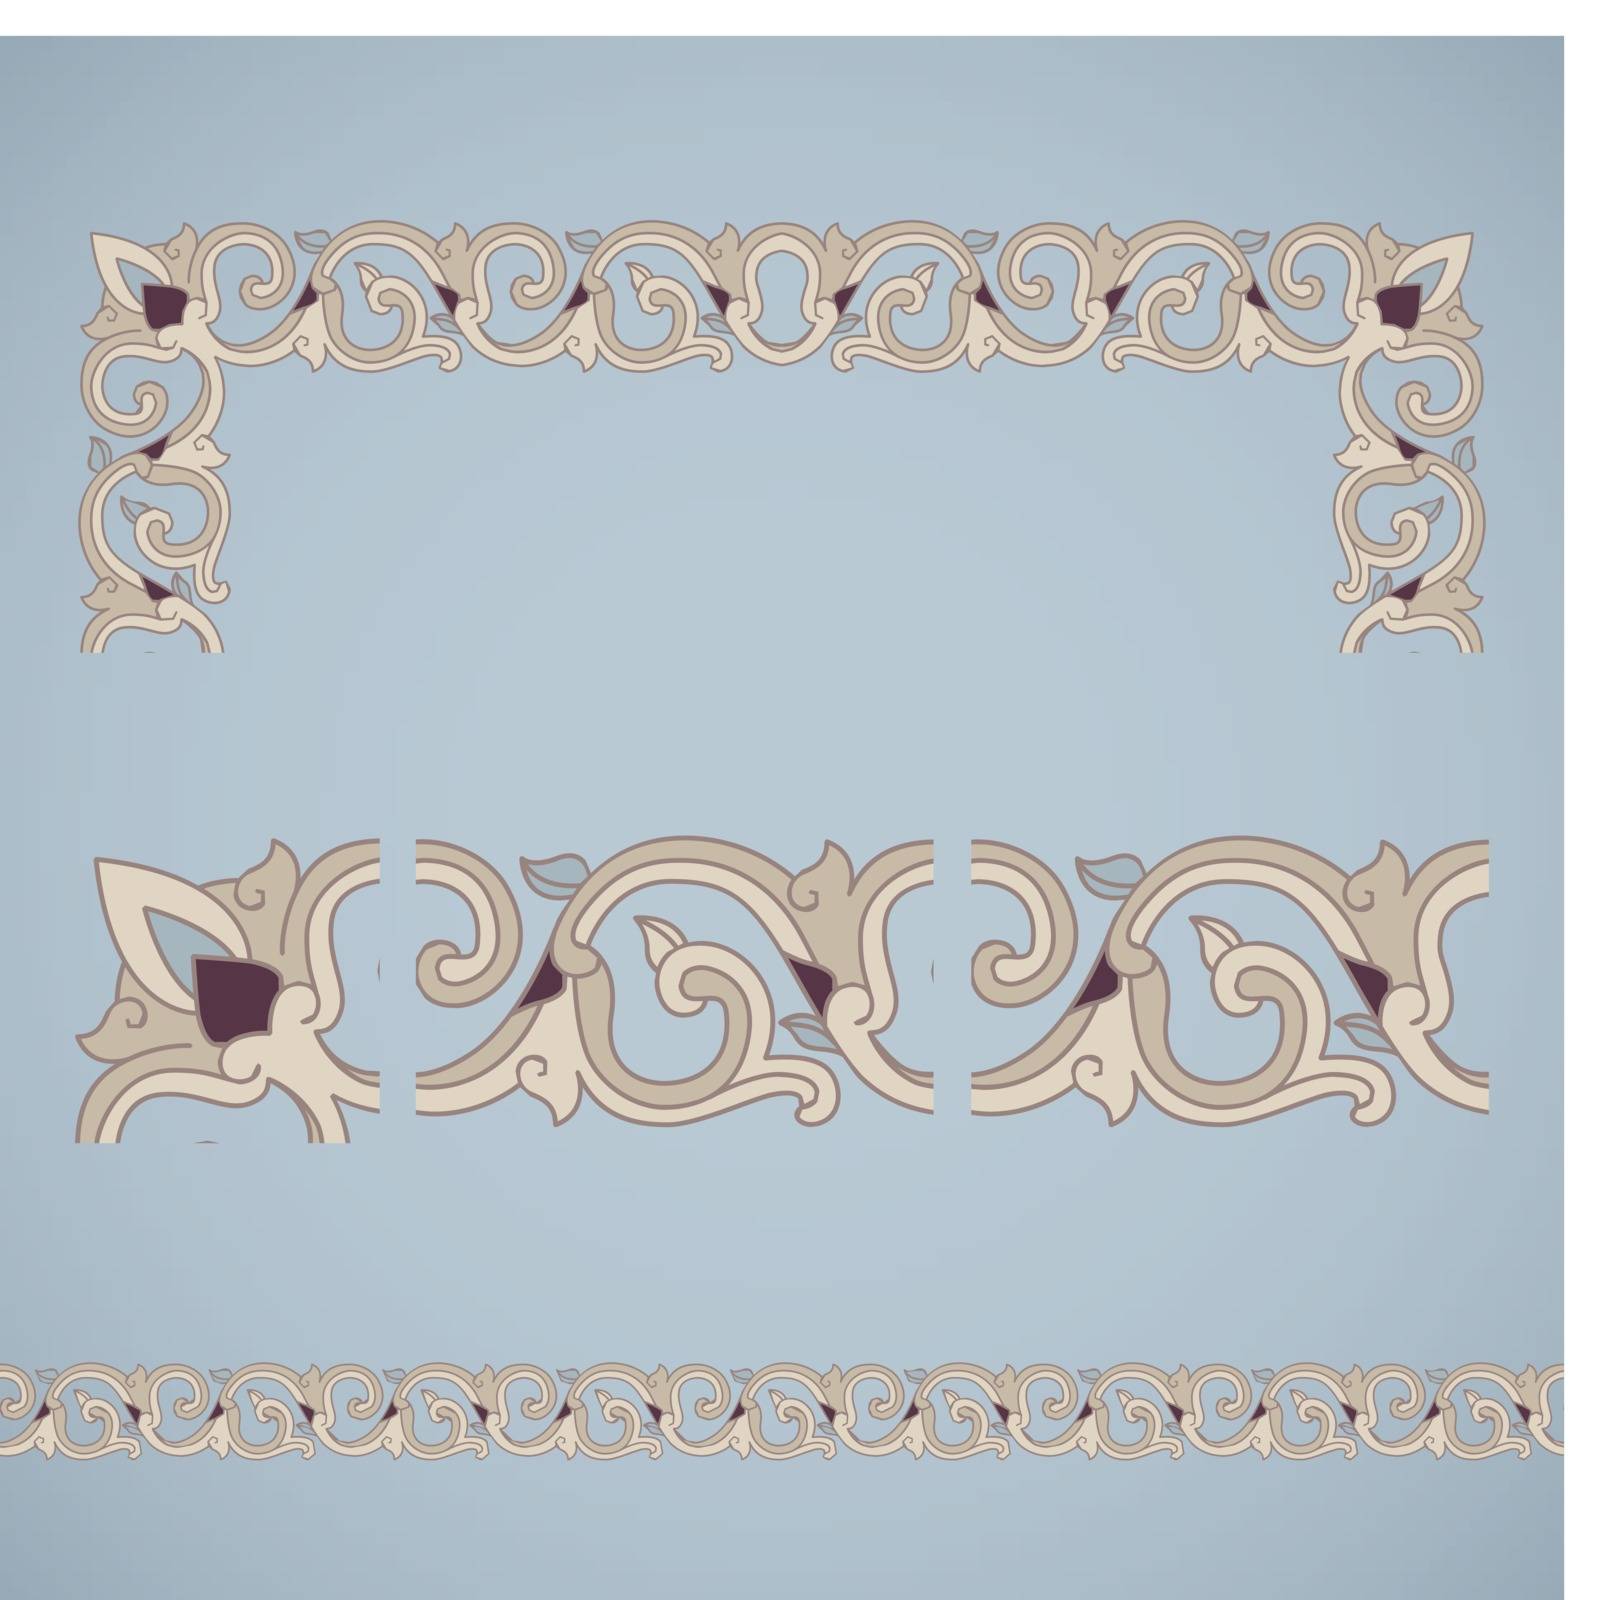 Seamless tiling border and frame with corner. Inspired by old ottoman ornaments